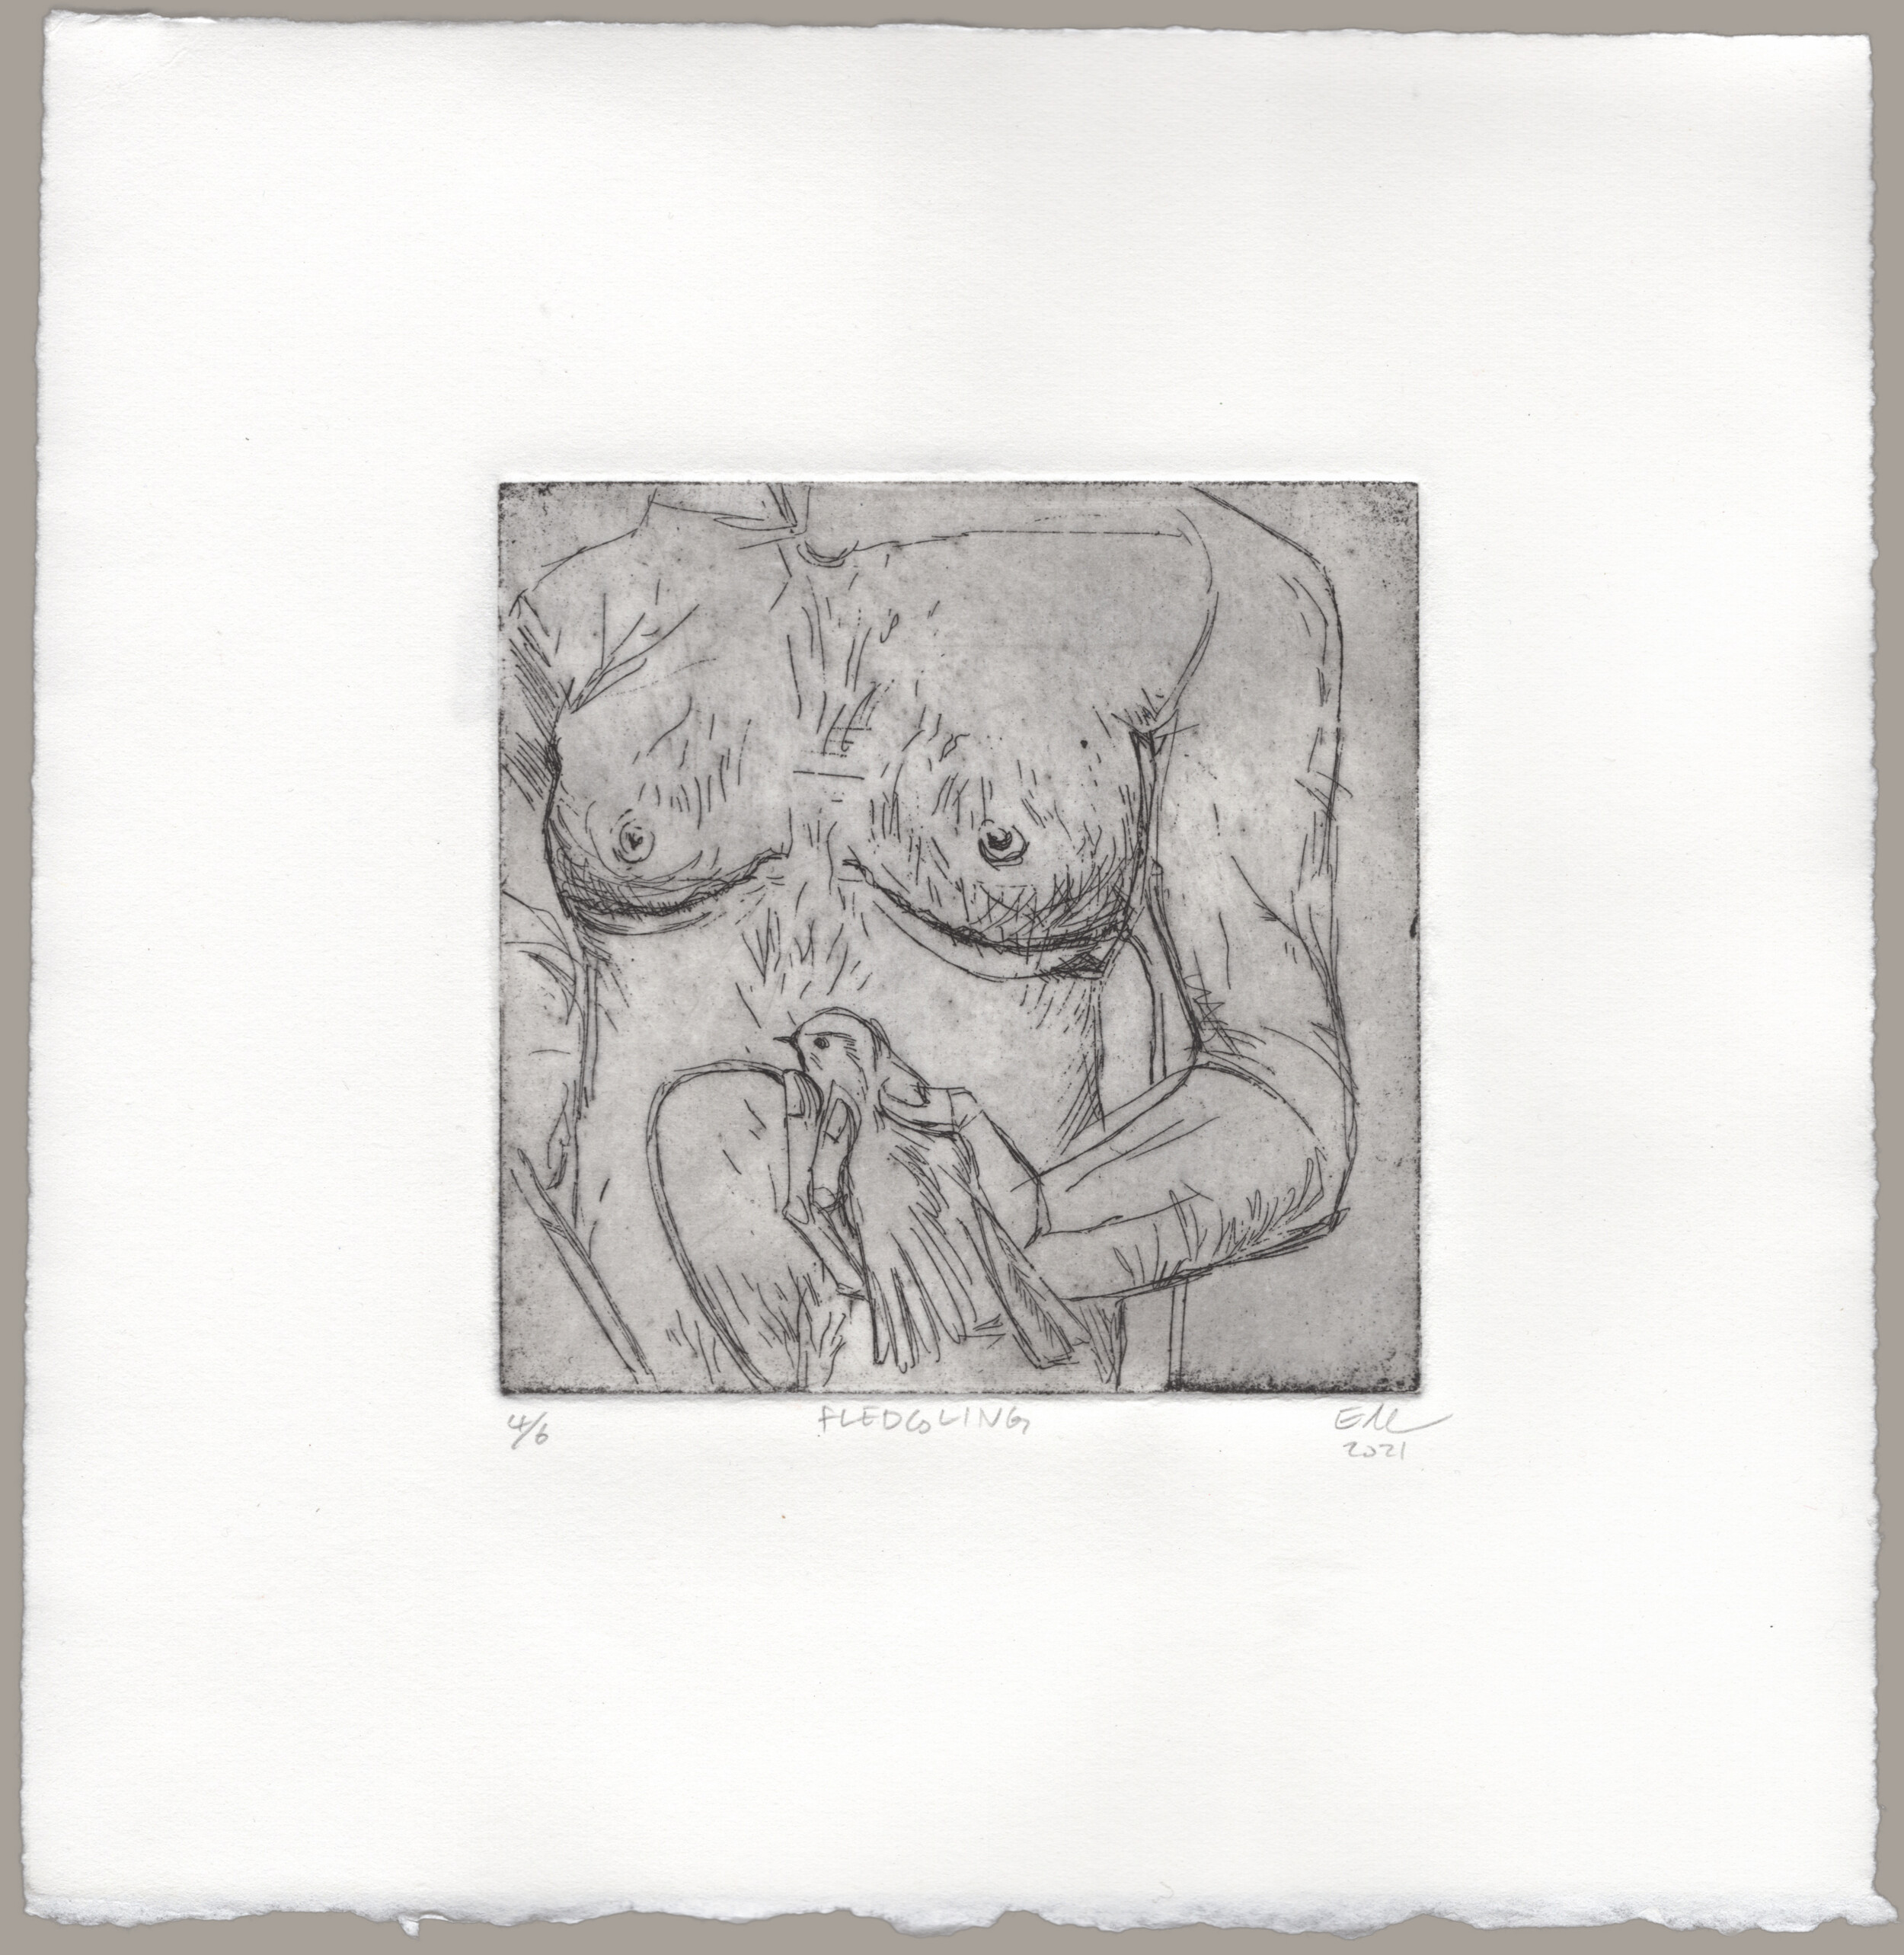 An etching of a hairy torso with recent top surgery scars. A drain tube hangs out of frame from the figures right incision. Their left arm is just out of frame, but their right arm is bent at the elbow, gently holding a sparrow. The bird is nestled calmly in the figures hand, looking off to the left. The other end of the drain tube loops up from out of frame and is connected to some unseen part of the bird. Print is signed: '4 of 6, Fledgling, EM 2021'